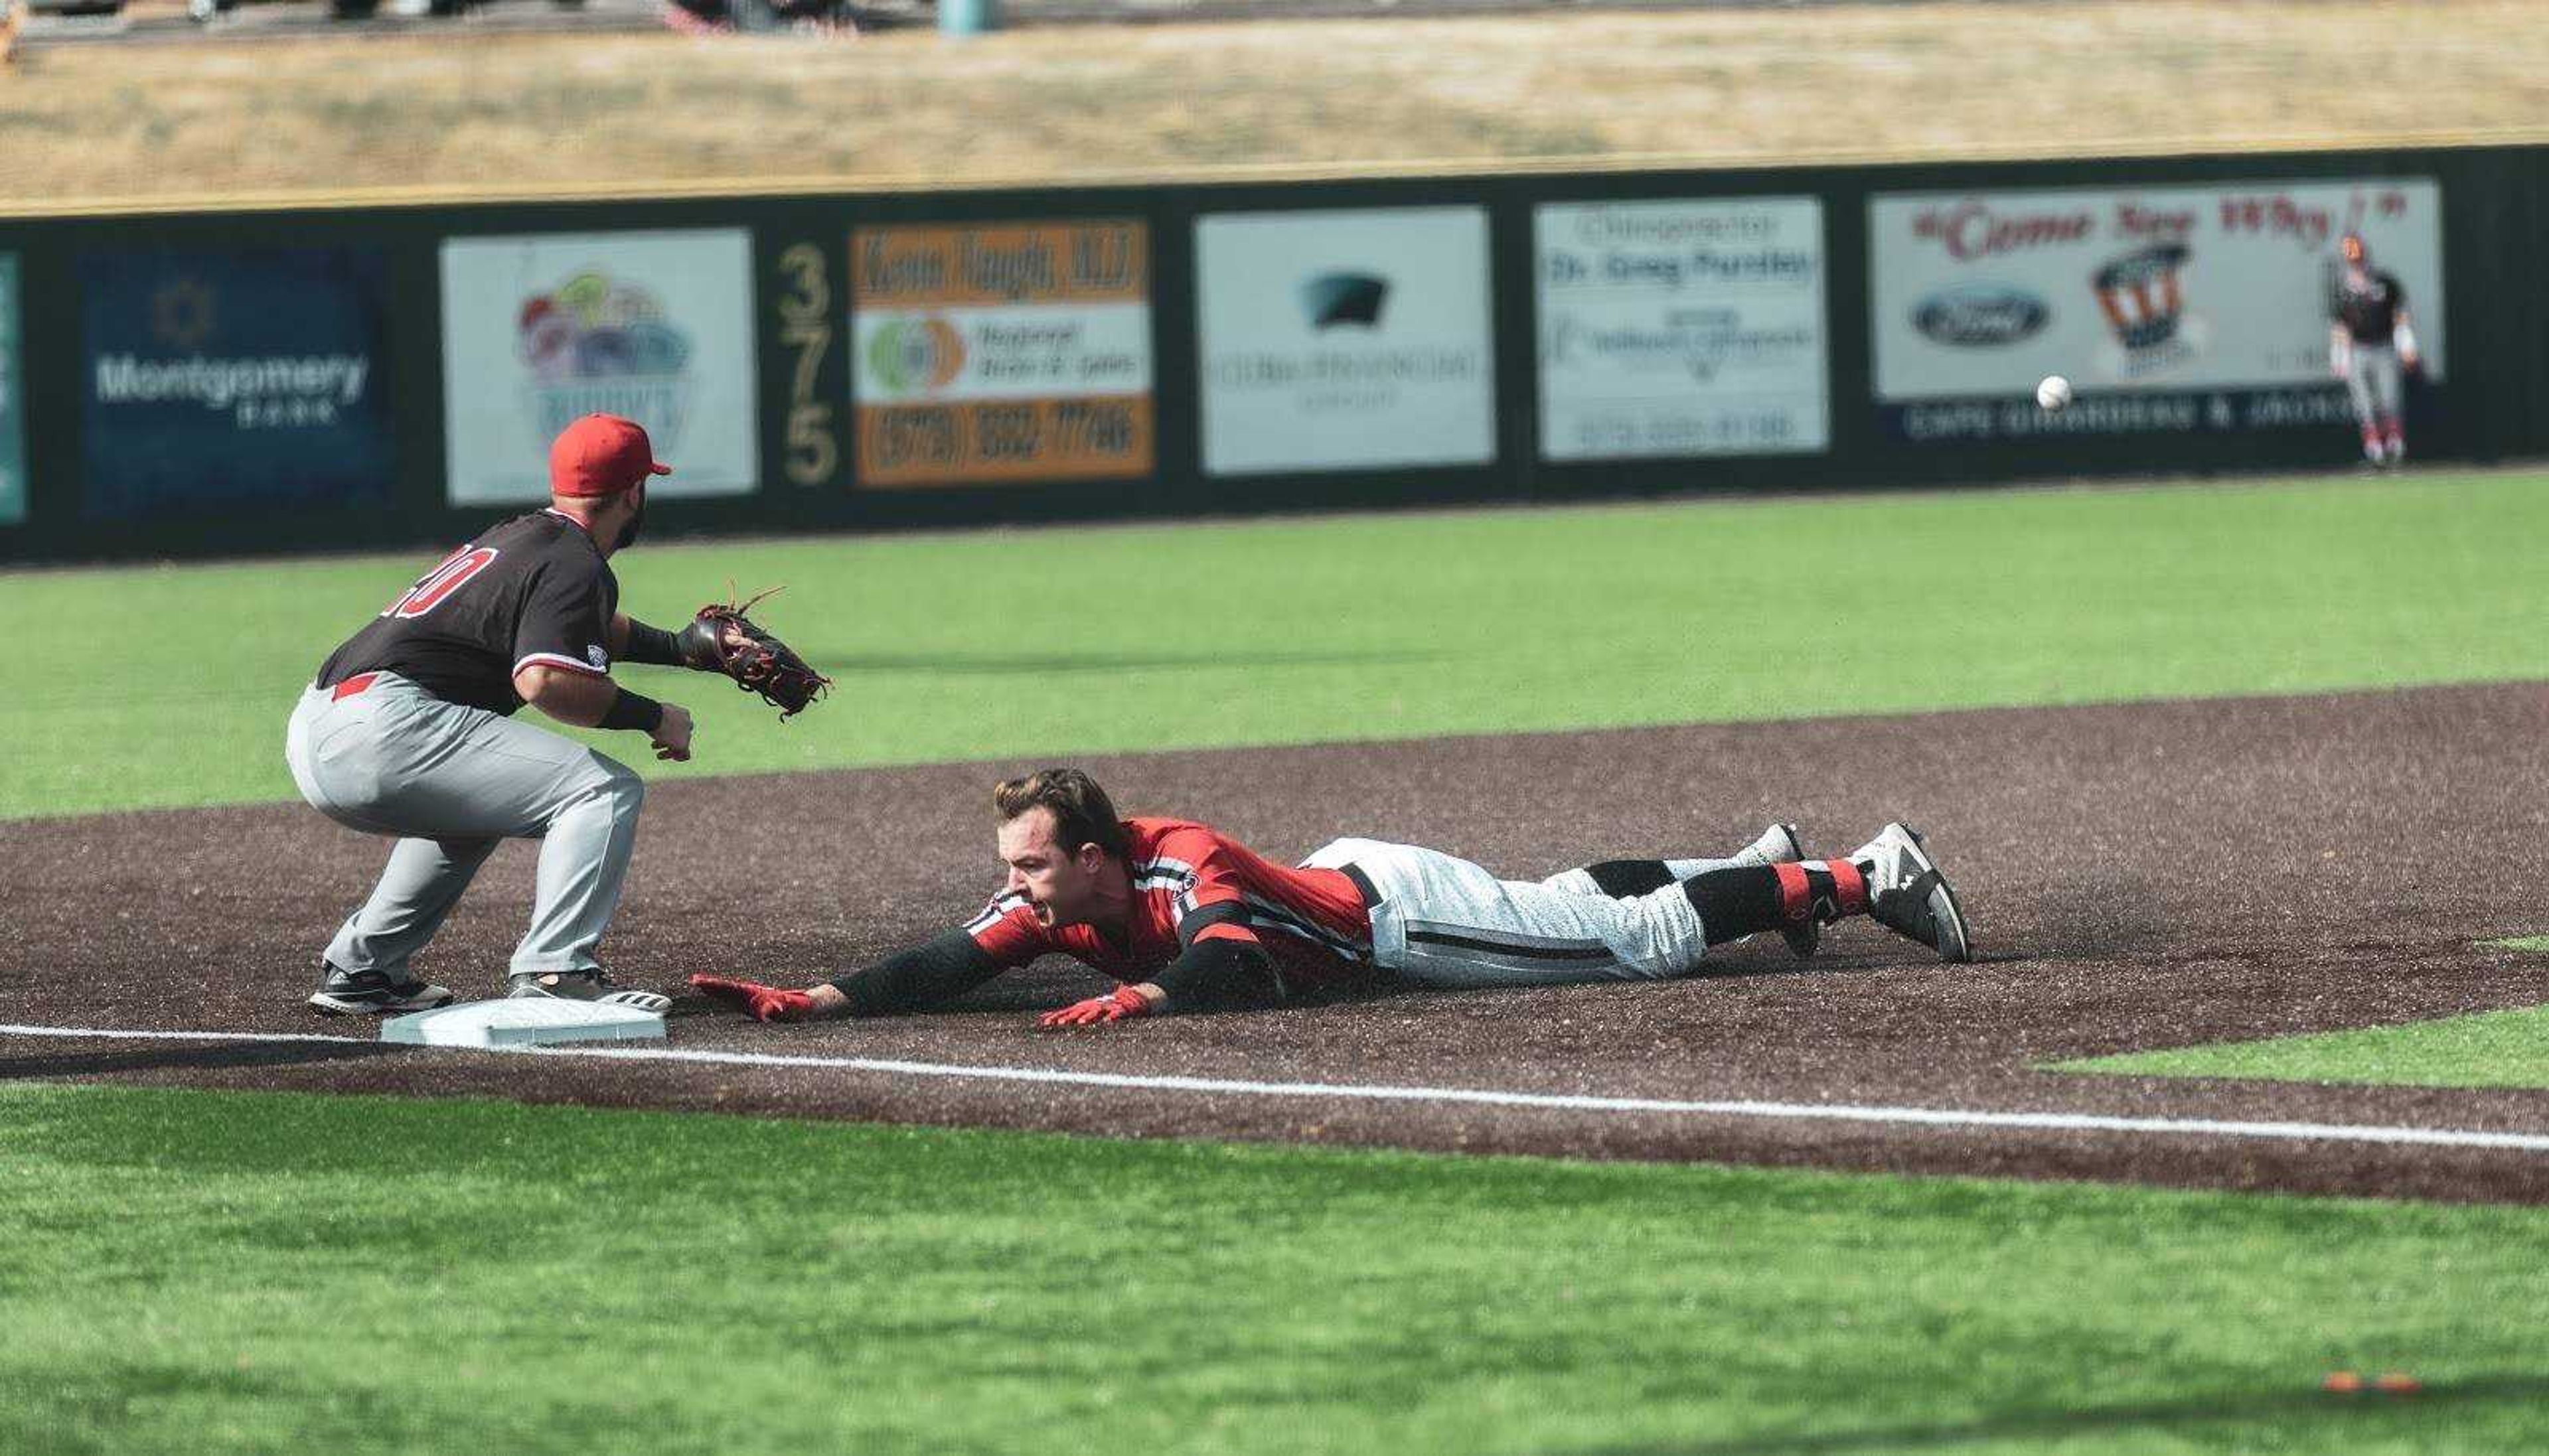 Tyler Wilber slides into third base after his big hit in game 1 of the Redhawks double-header on Saturday, Feb. 22.